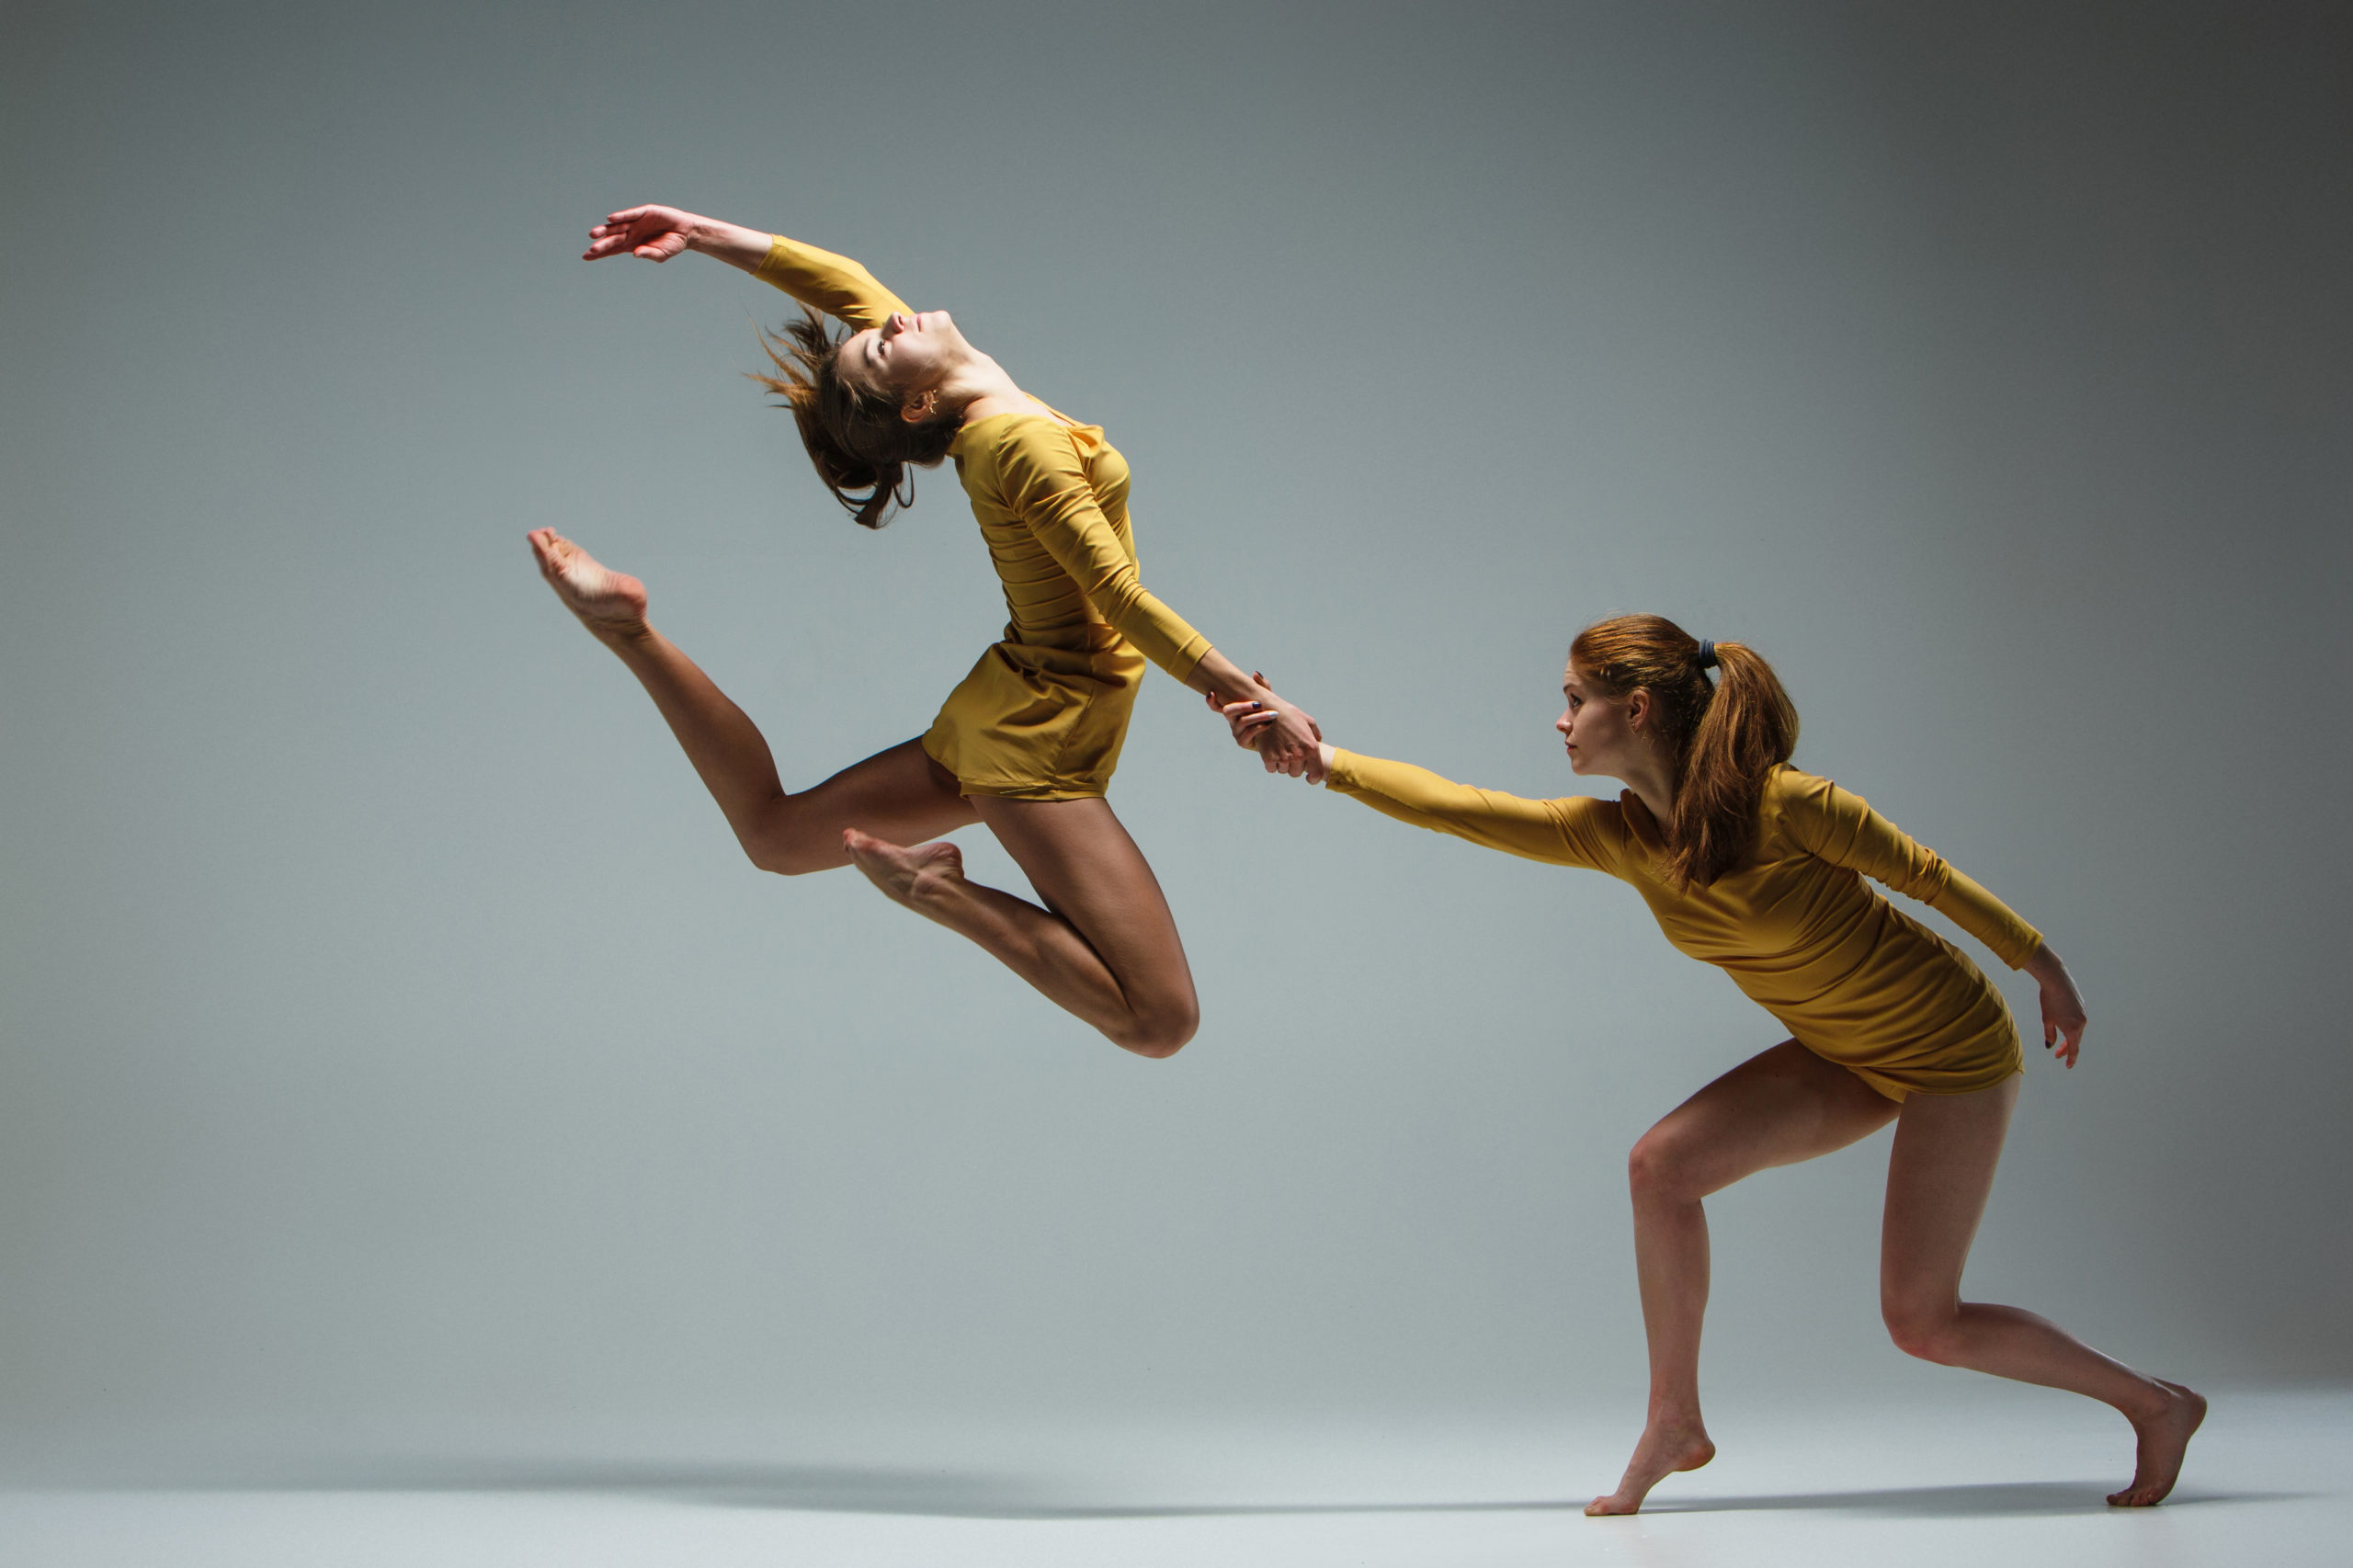 20 Compliments for Dancers to Celebrate National Compliment Day